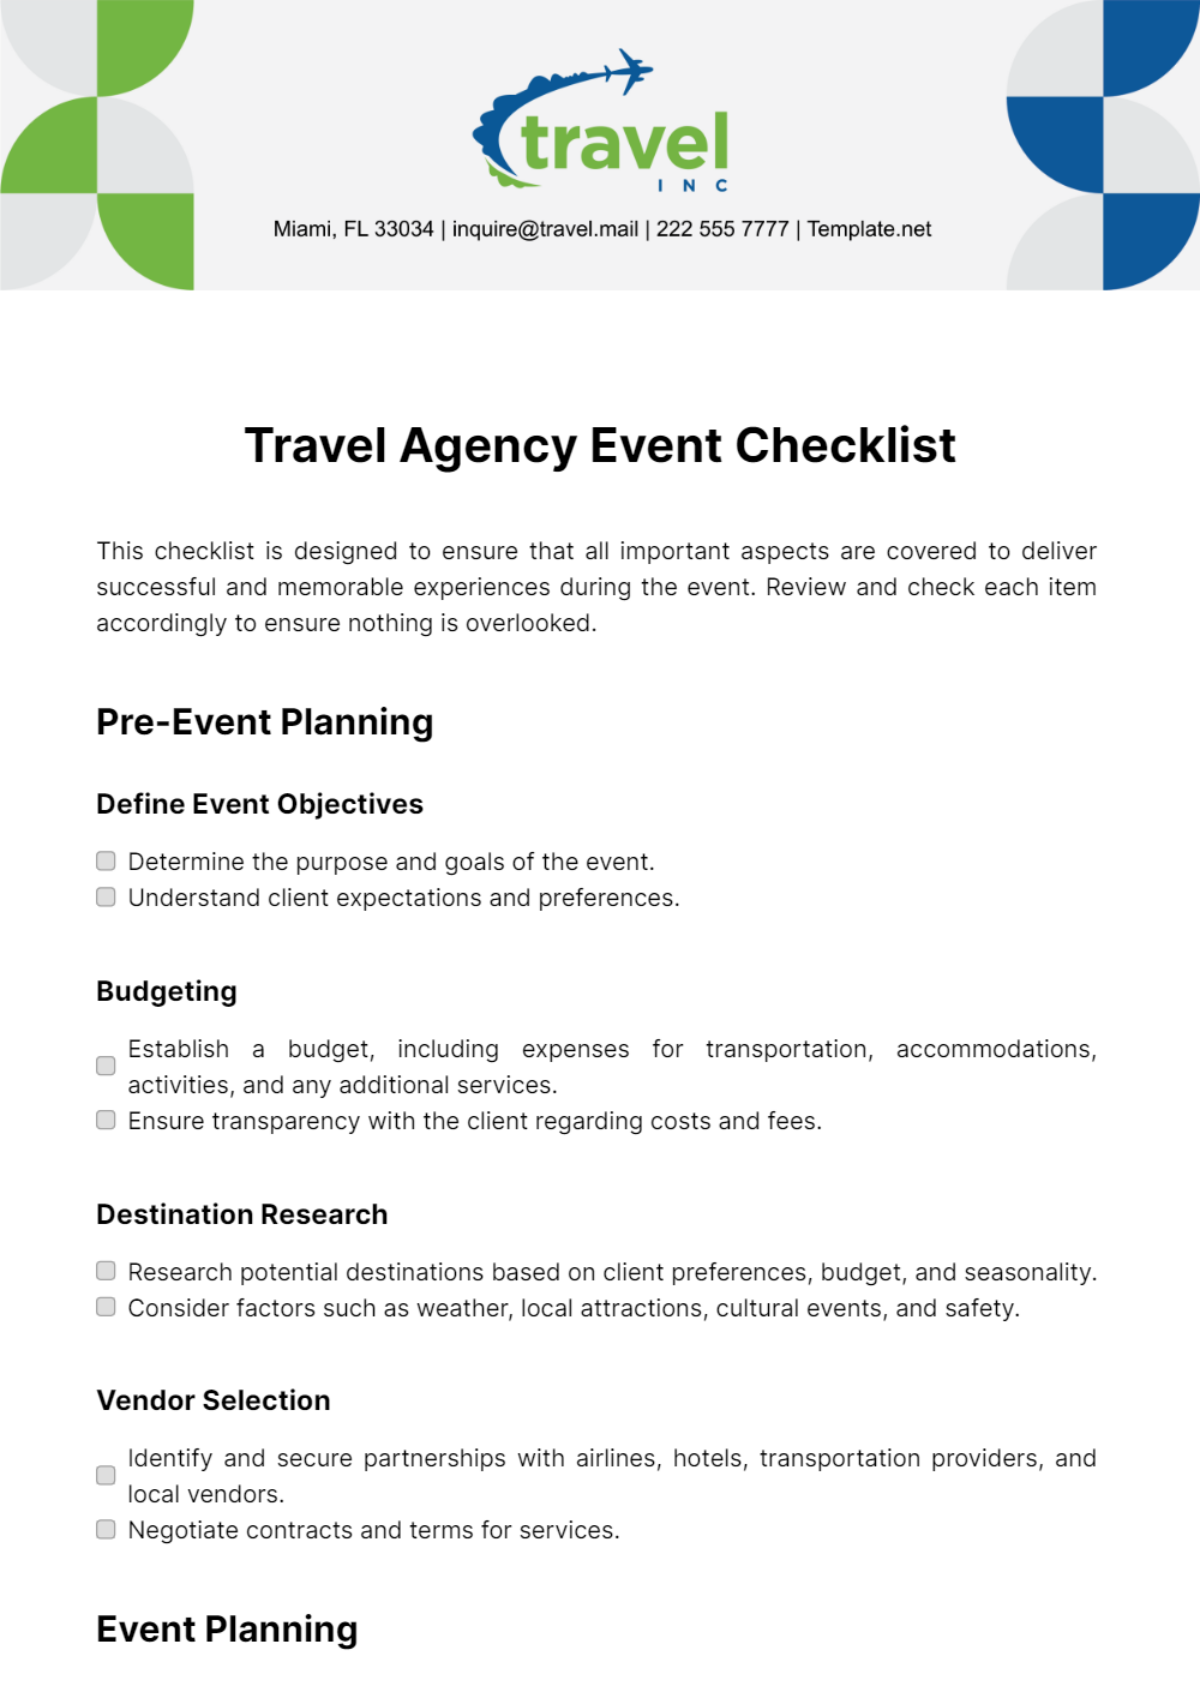 Travel Agency Event Checklist Template